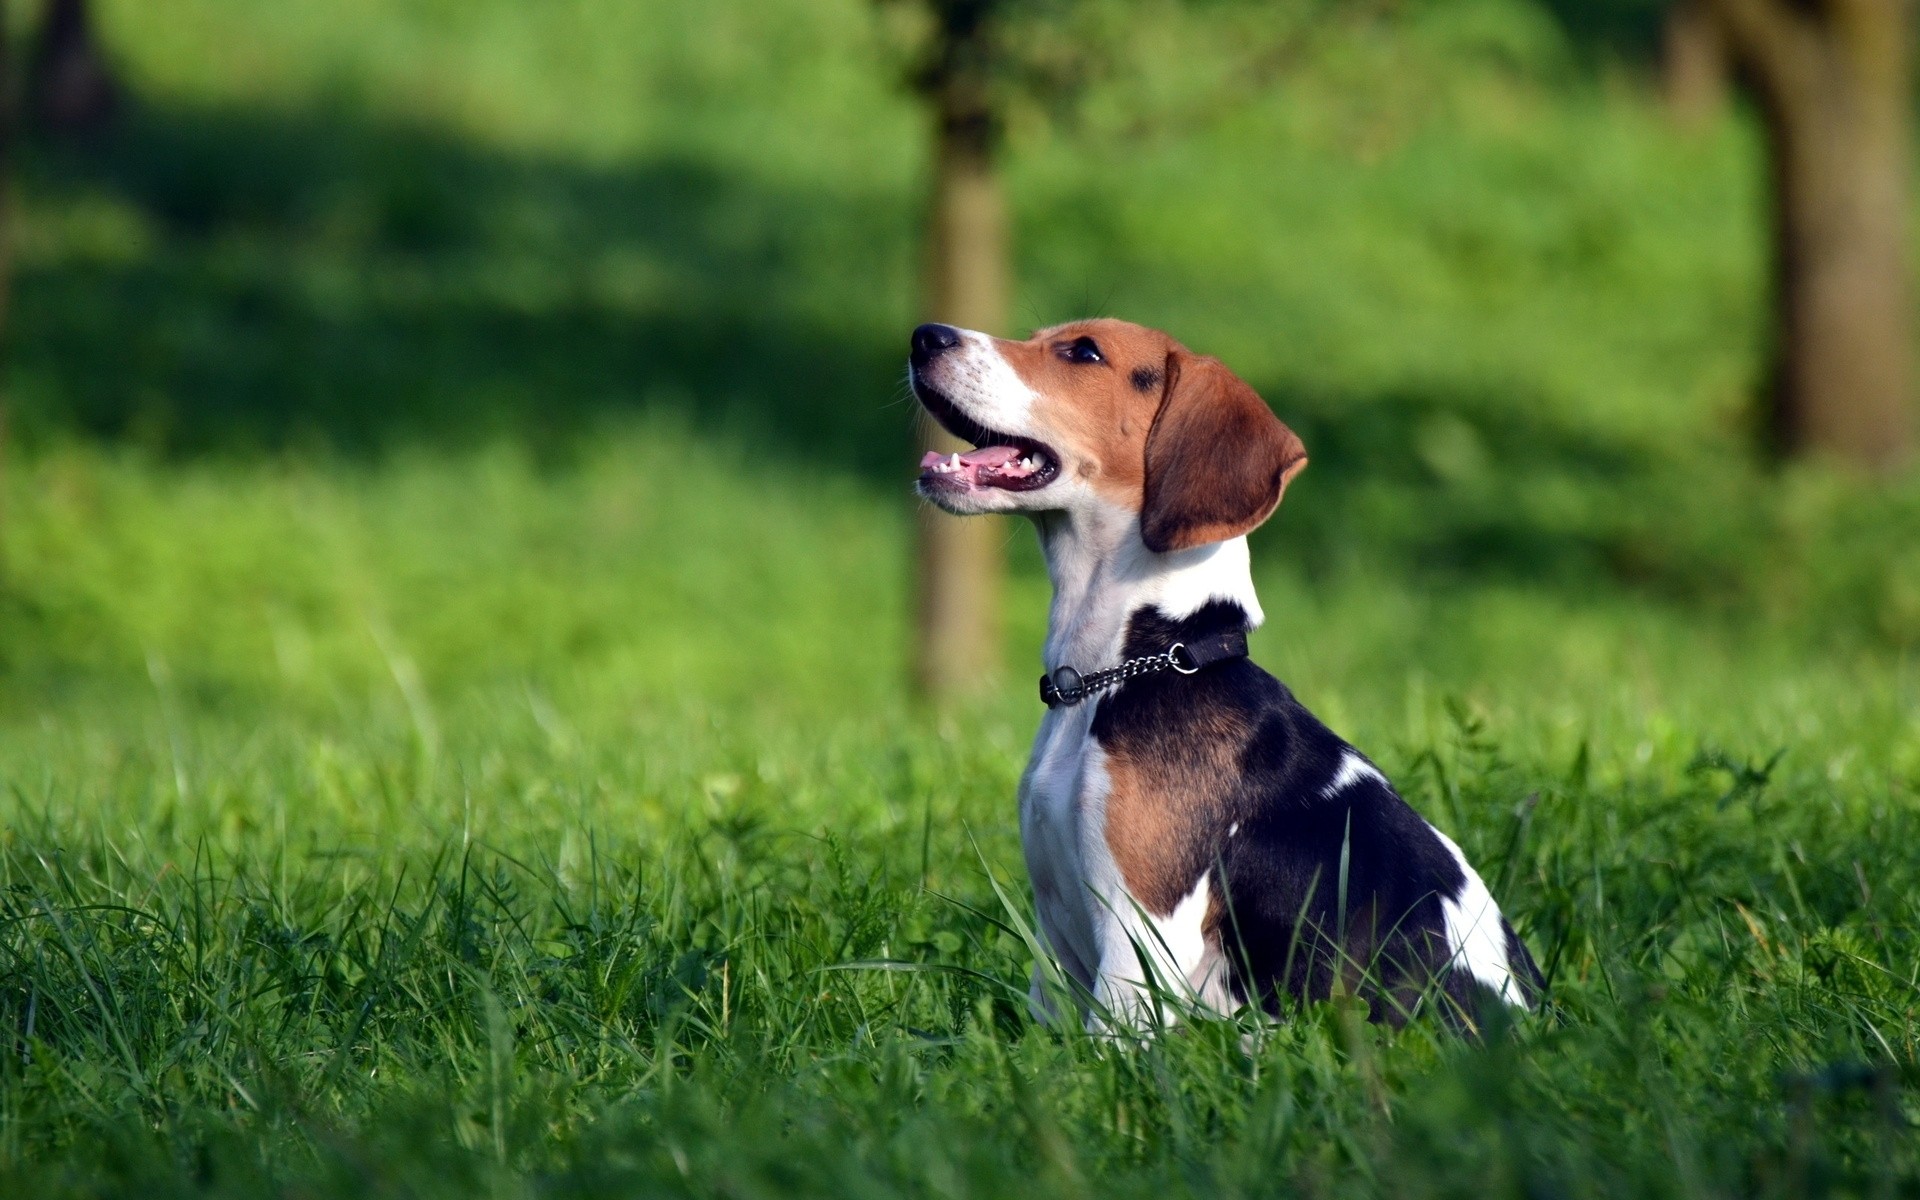 beagle-dog-on-the-grass-widescreen-high-definition-wallpaper-images-full-free-cute-lovely-animals-hd-1920x1200